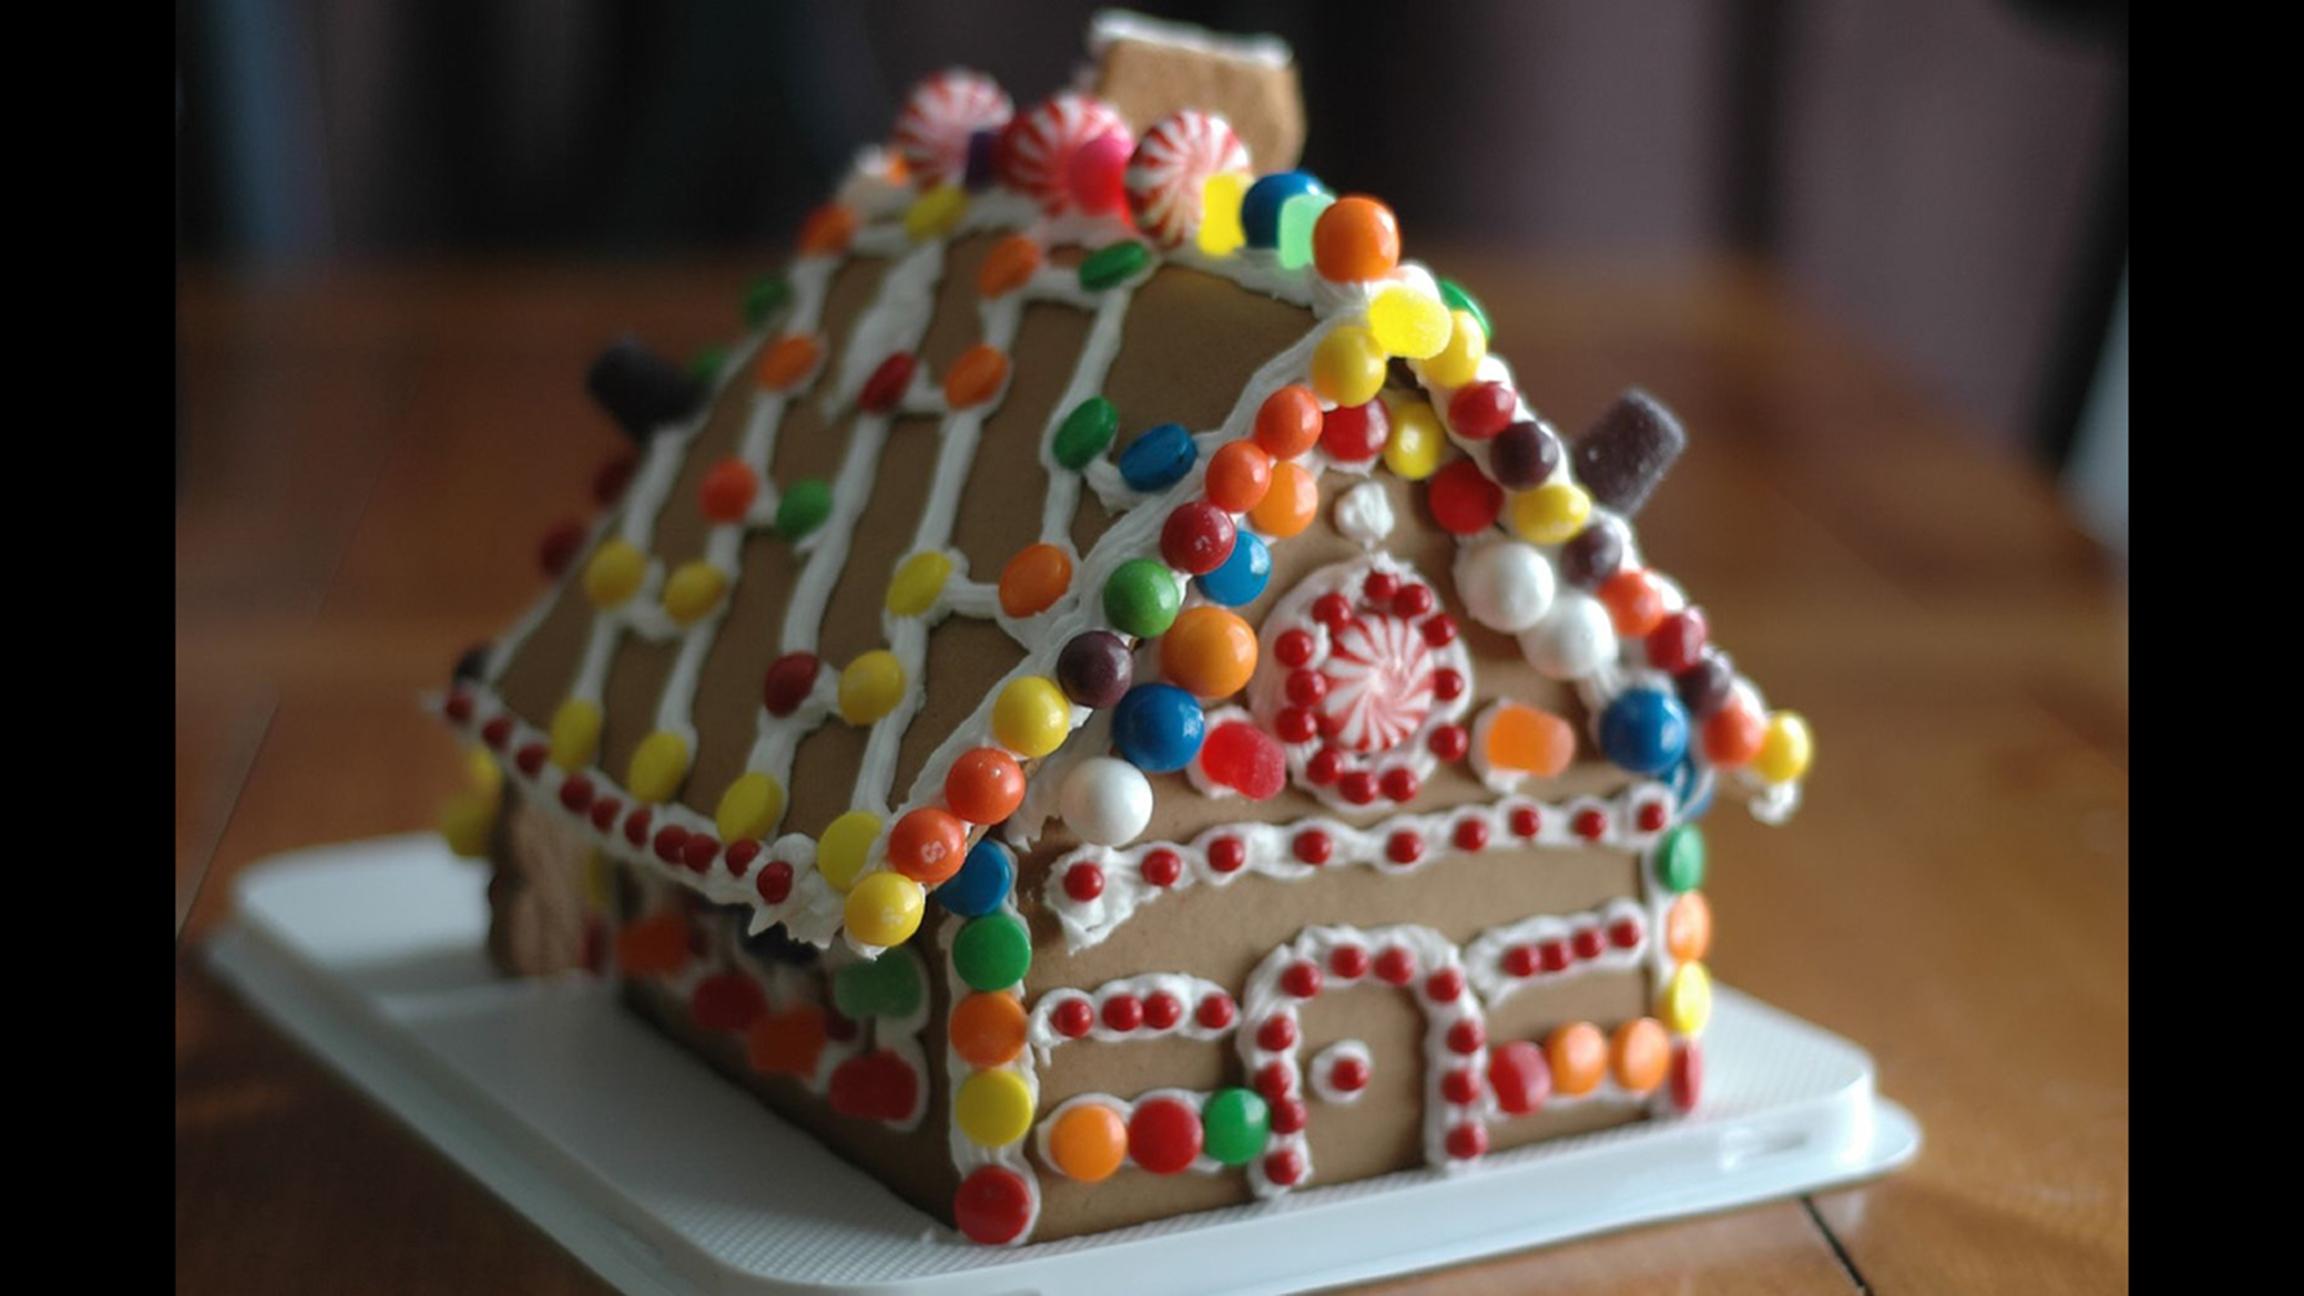 House party: Indulge your sweet side with gingerbread house-decorating events. (Carrie Stephens / Flickr)